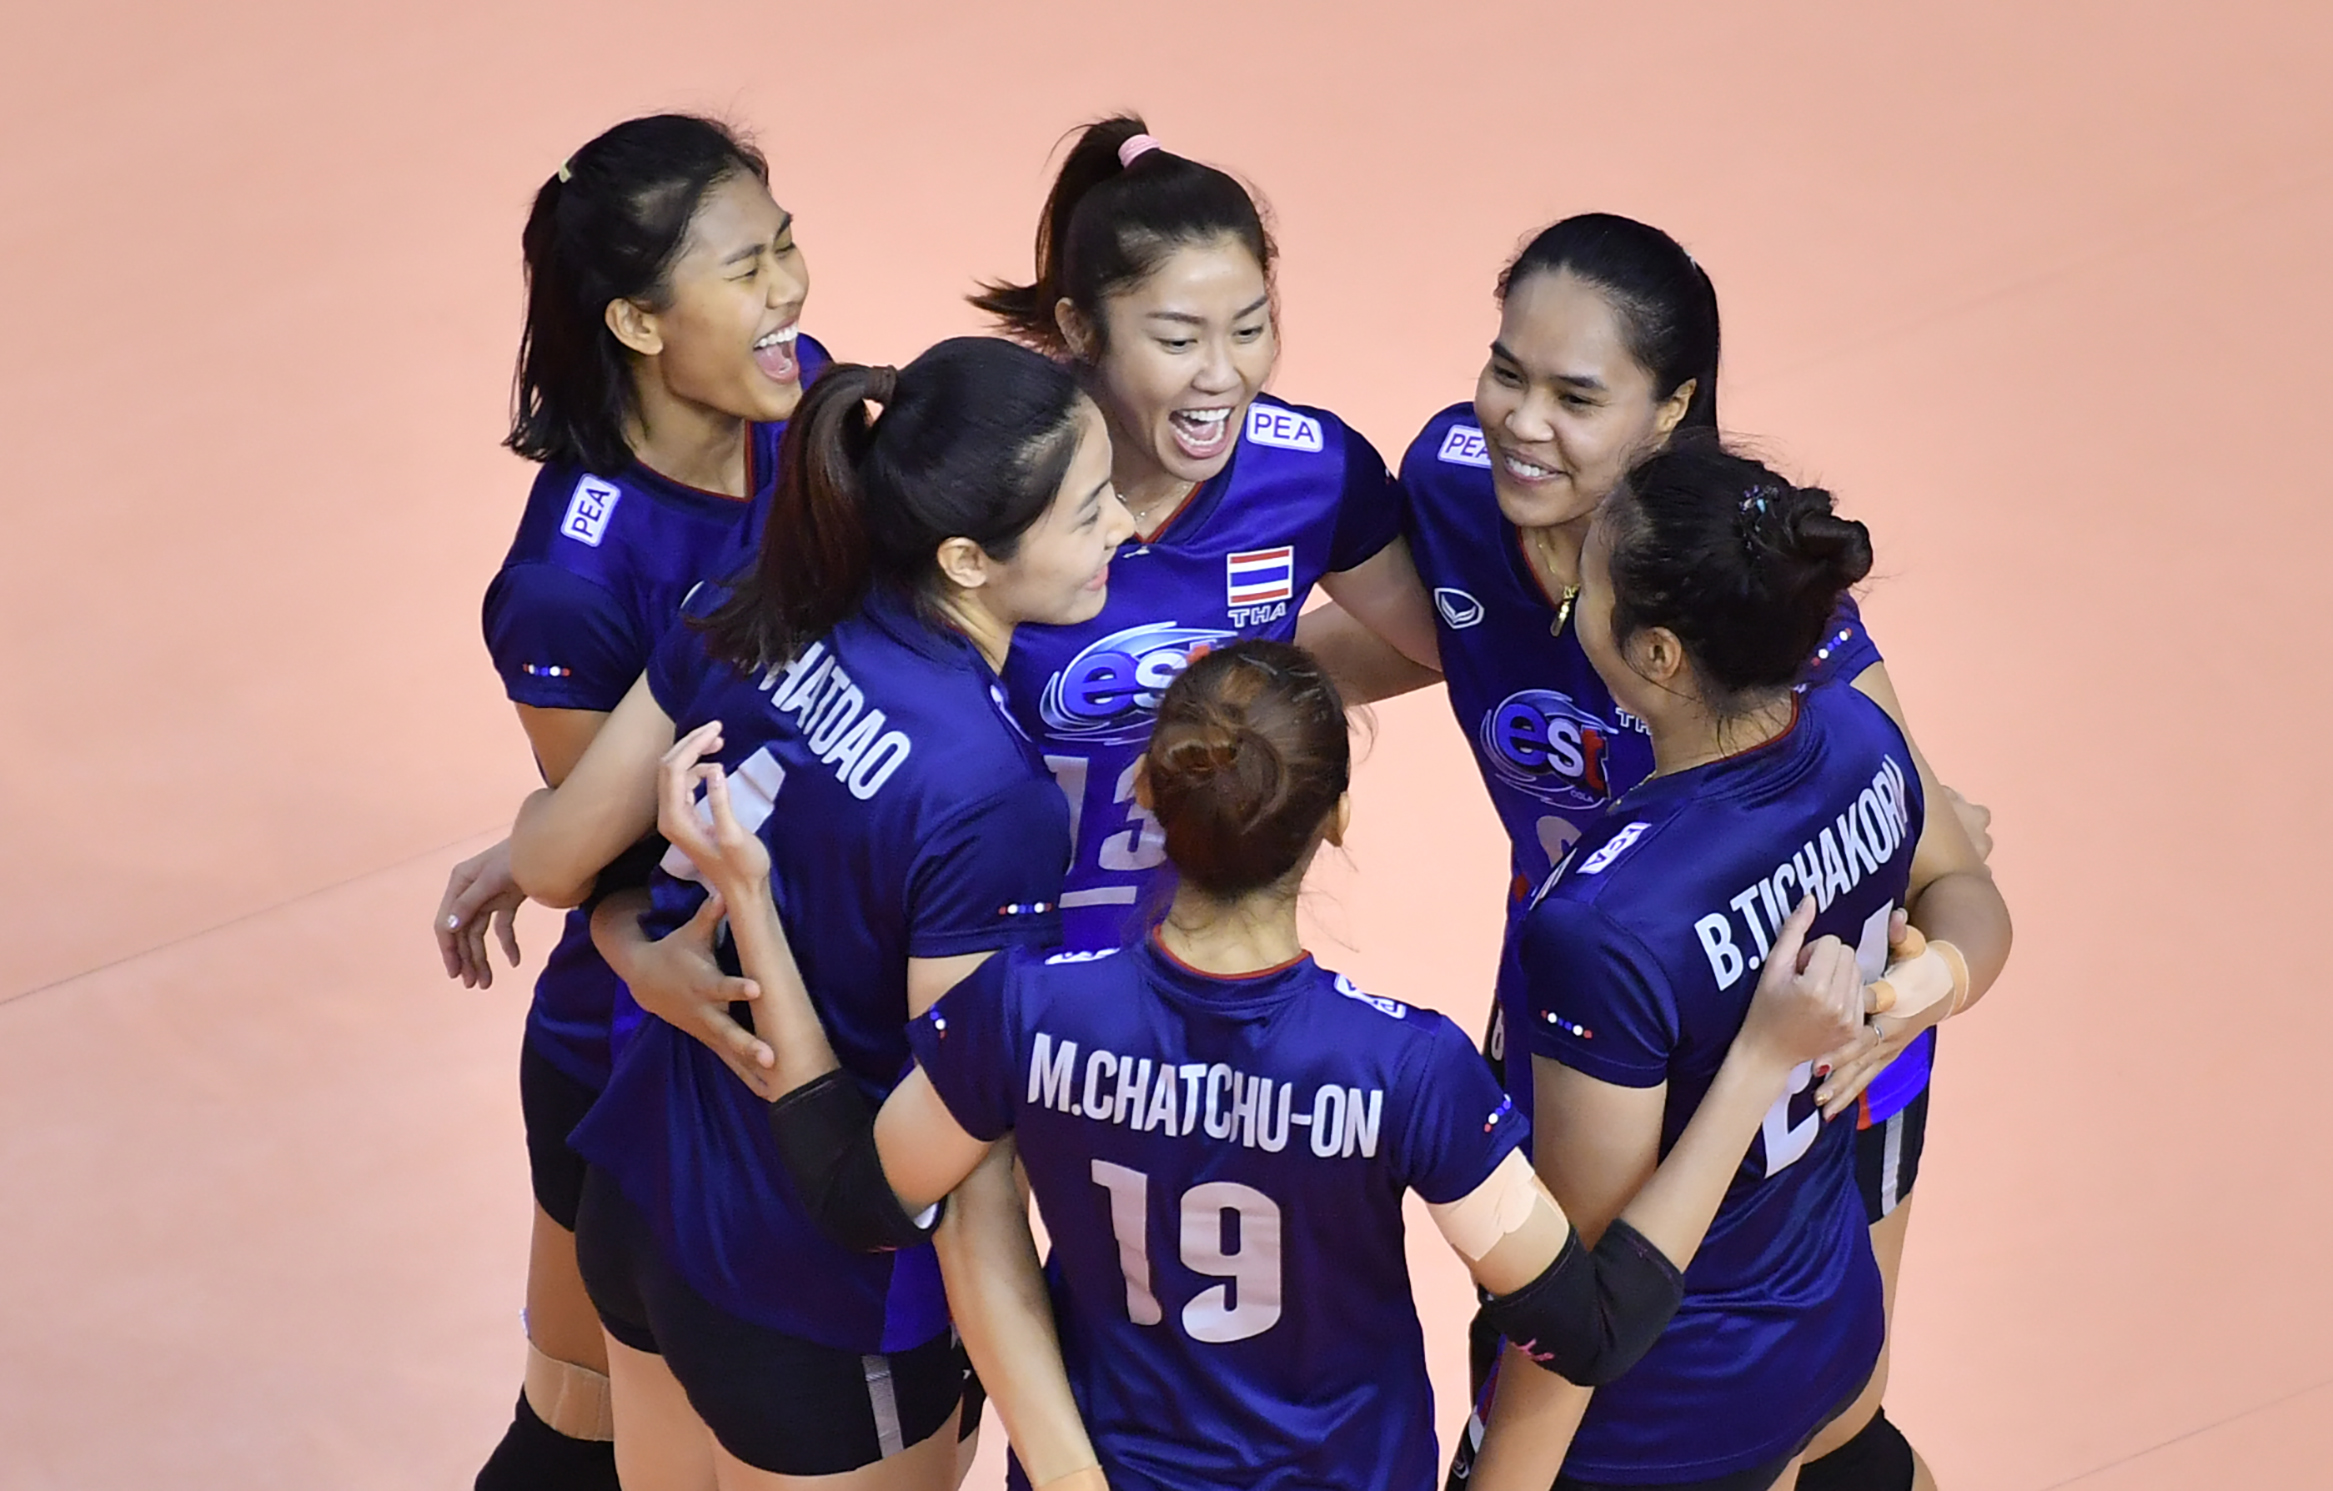 THAILAND TO TAKE ON KAZAKHSTAN AND KOREA MEET CHINESE TAIPEI AT SEMIFINALS OF AVC WOMEN’S TOKYO VOLLEYBALL QUALIFICATION